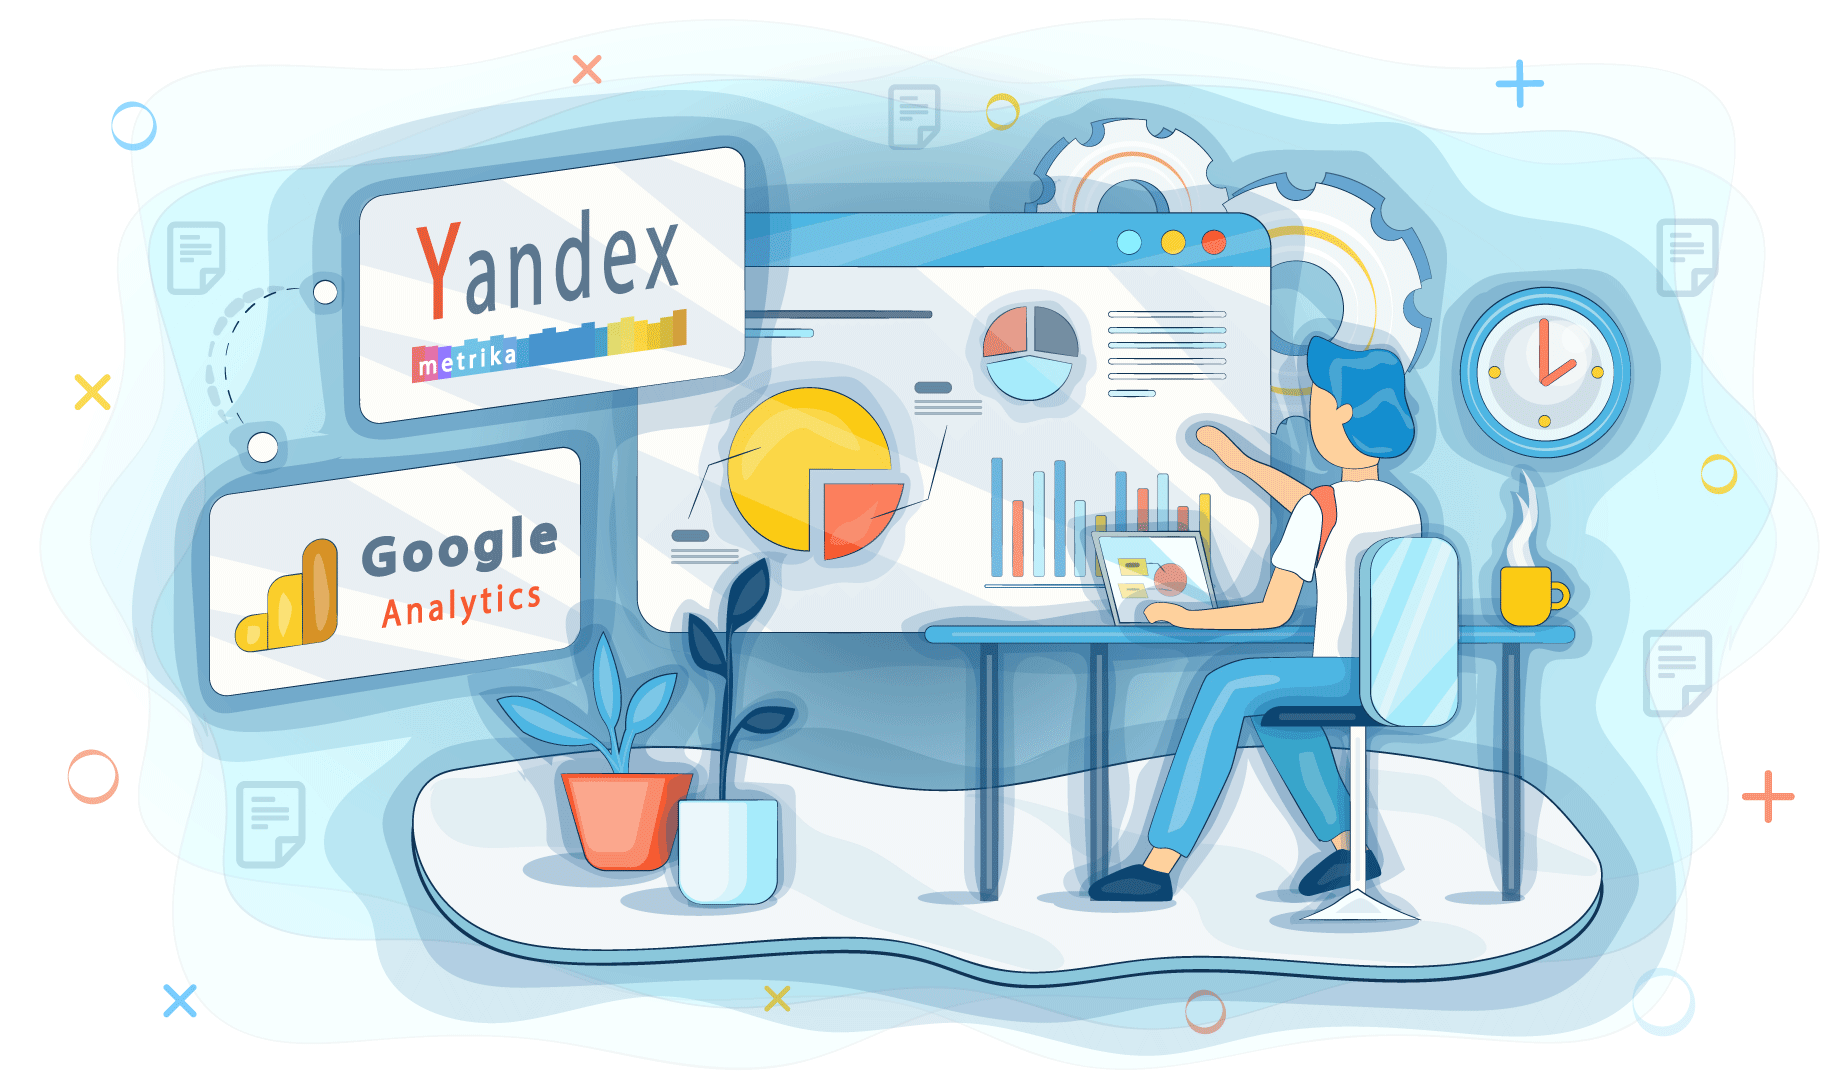 How to connect the site to Google Analytics and Yandex.Metrika?